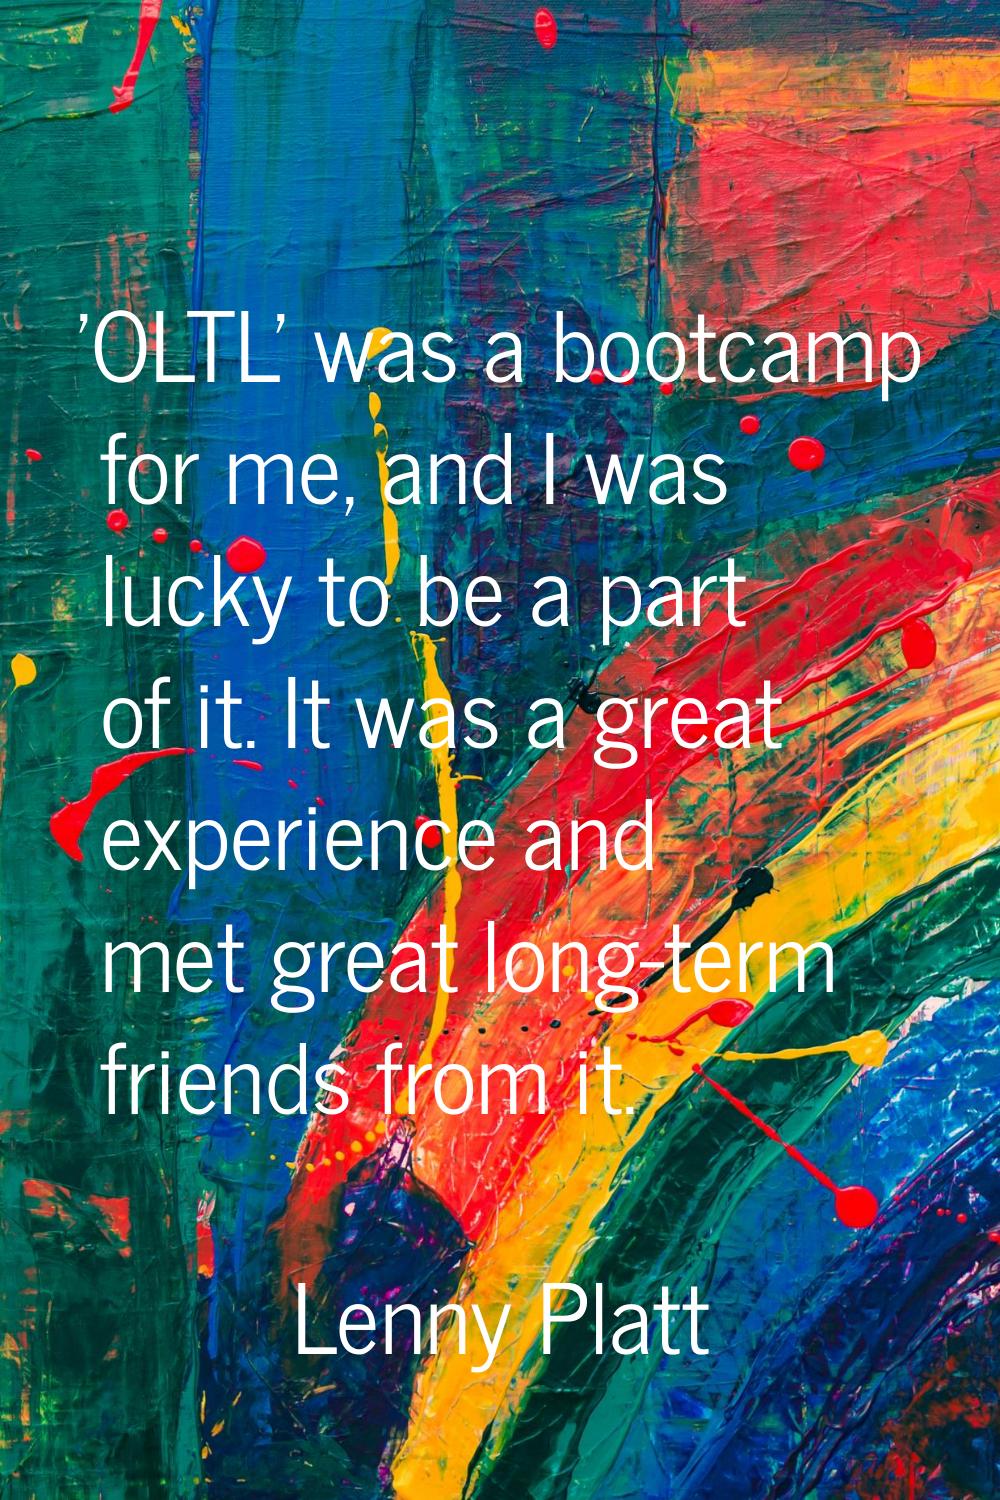 'OLTL' was a bootcamp for me, and I was lucky to be a part of it. It was a great experience and met